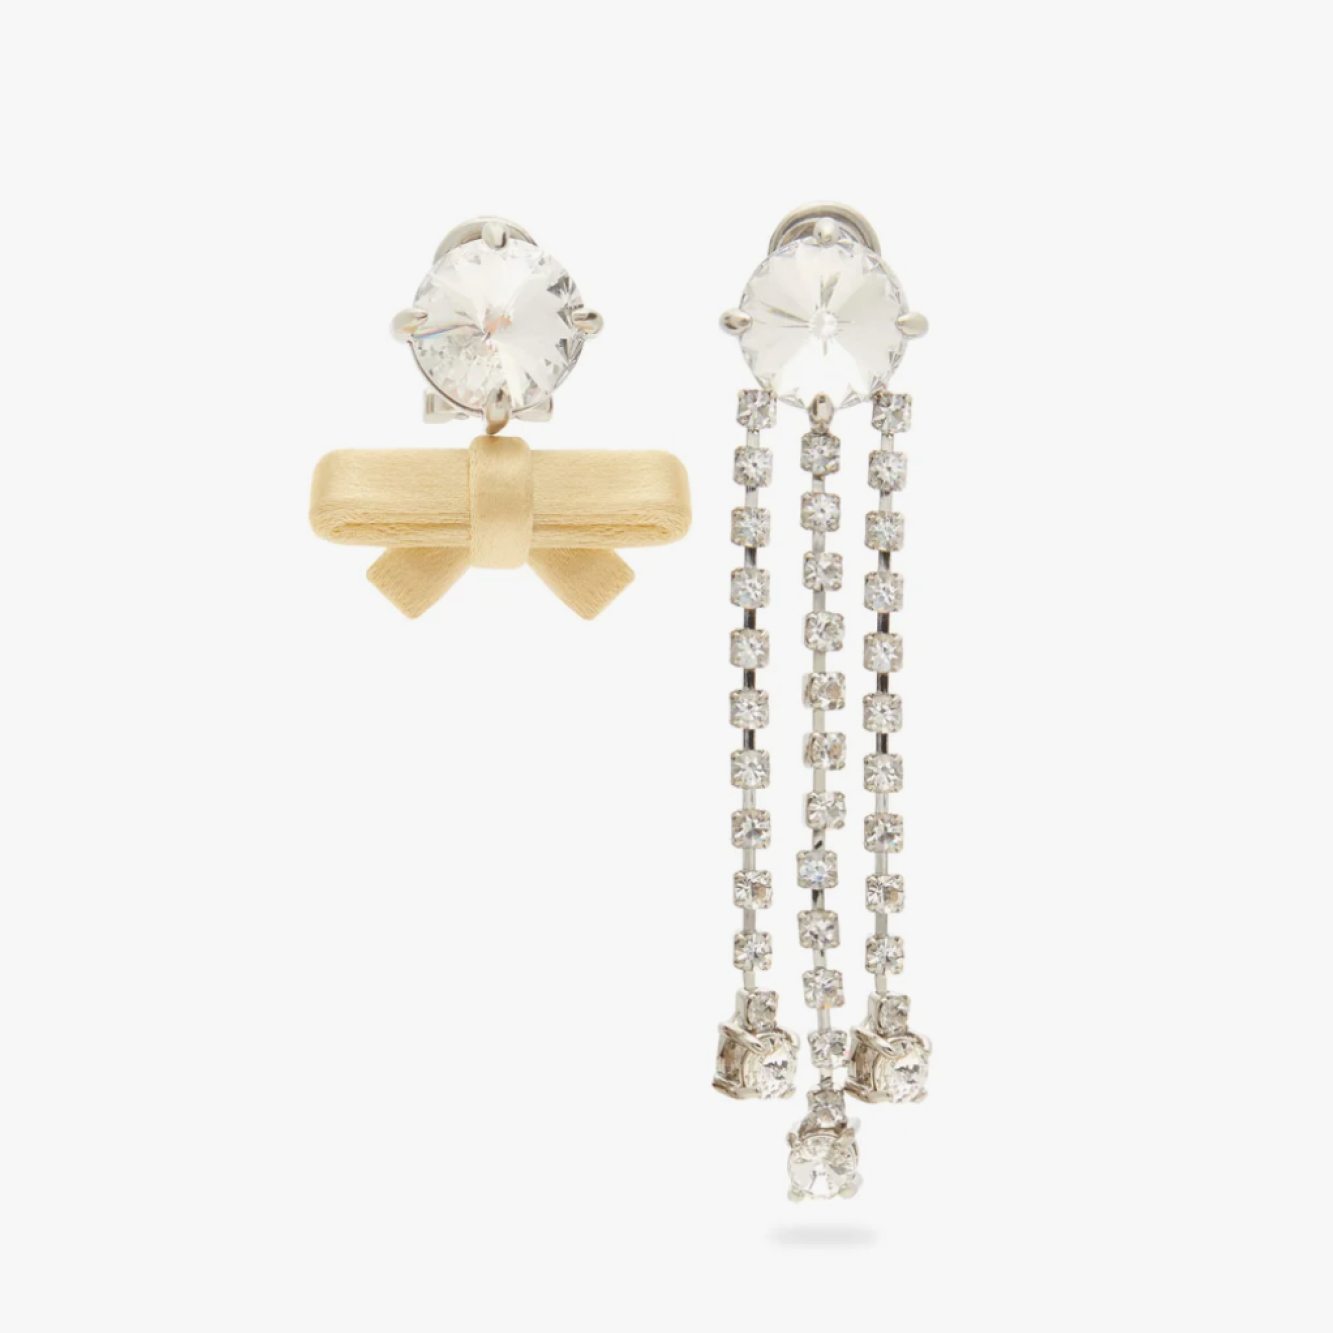 Miu Miu Mismatched Crystal and Bow Earrings